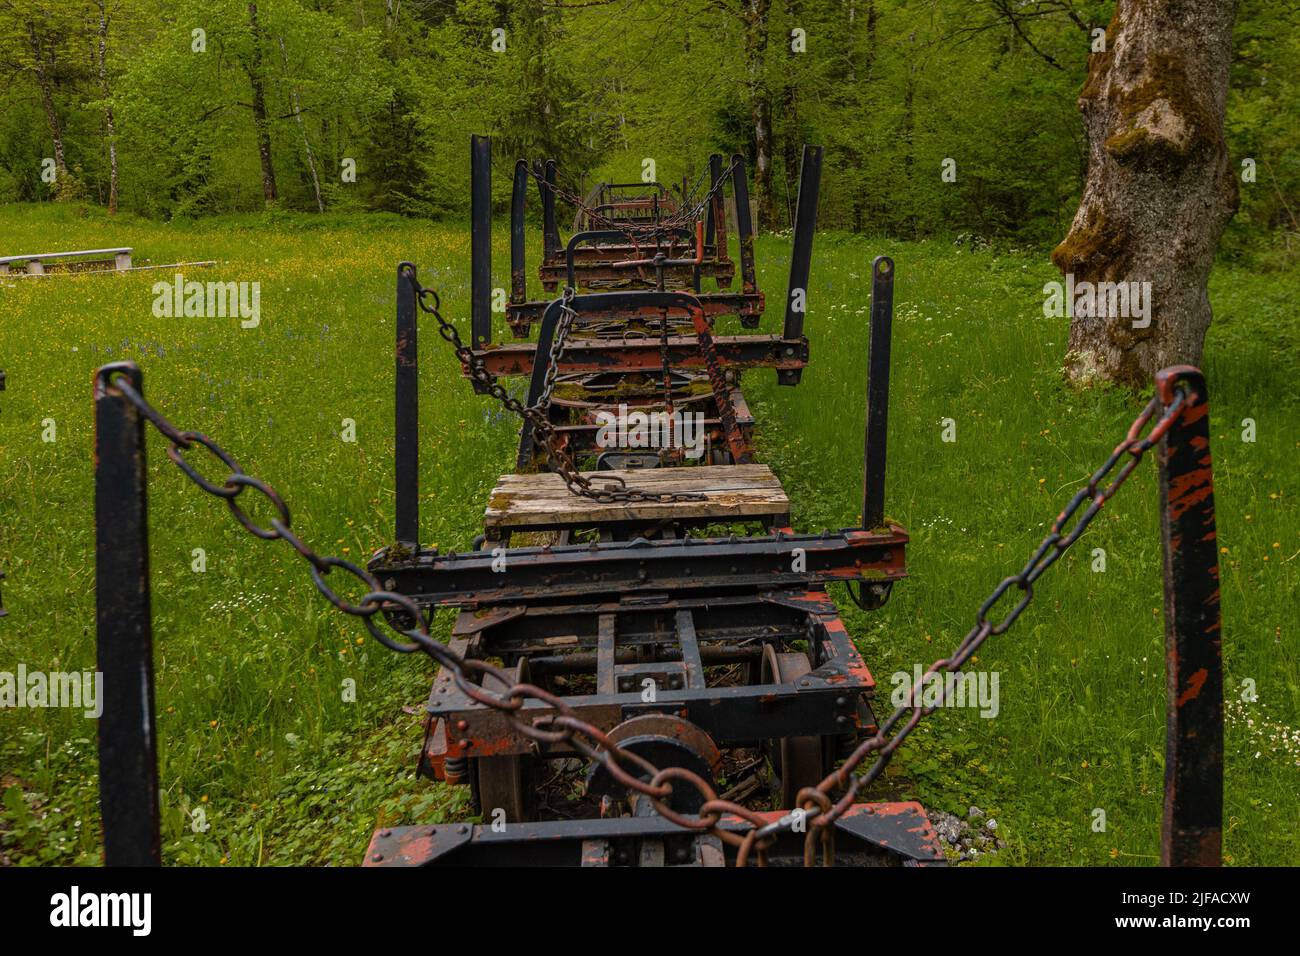 Waldbahn Reichraming, old museum narrow gauge railway close to Reichraming, Austria. Visible trucks or wagons for wood. Stock Photo